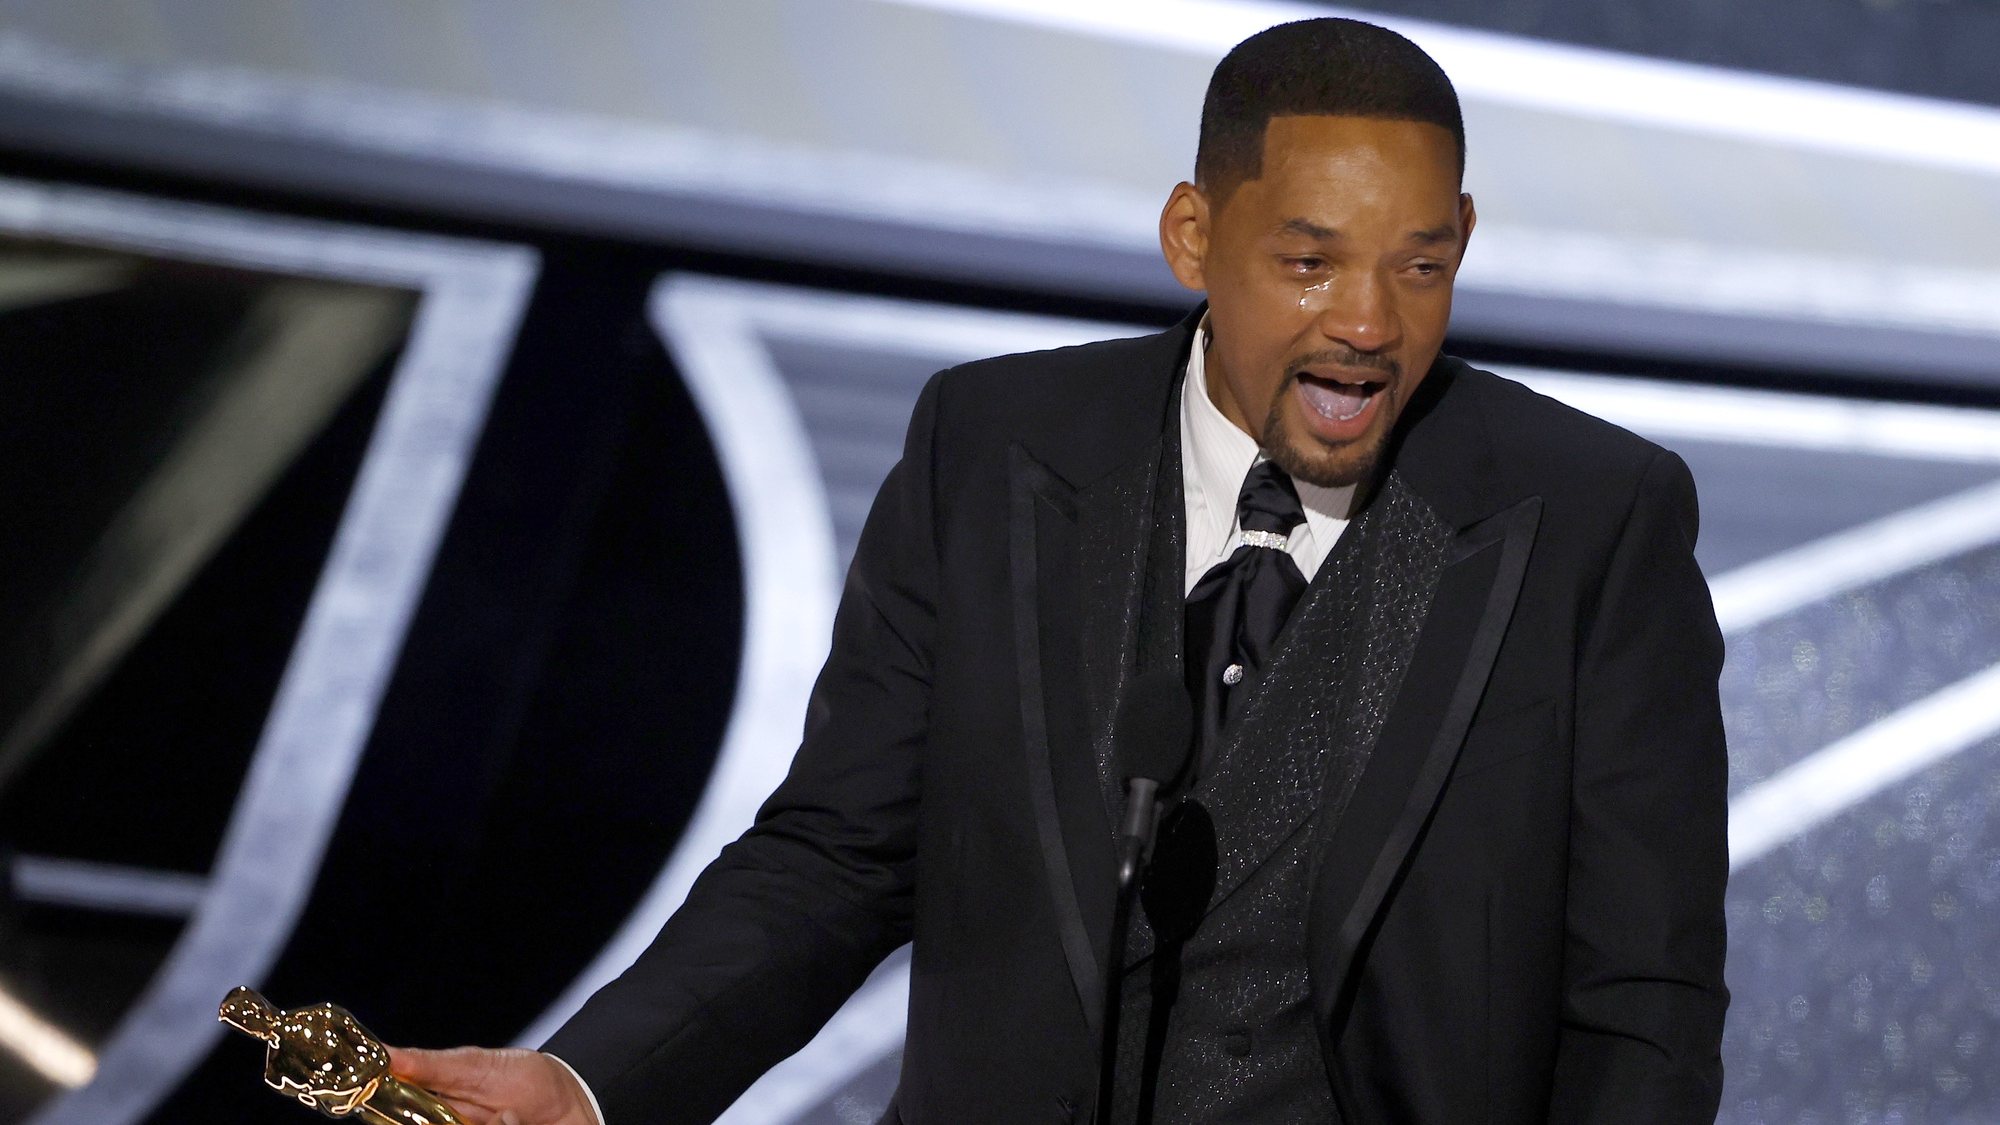 epaselect epa09854894 US actor Will Smith reacts as he speaks after winning the Oscar for Best Actor for &#039;King Richard&#039; during the 94th annual Academy Awards ceremony at the Dolby Theatre in Hollywood, Los Angeles, California, USA, 27 March 2022. The Oscars are presented for outstanding individual or collective efforts in filmmaking in 24 categories.  EPA/ETIENNE LAURENT